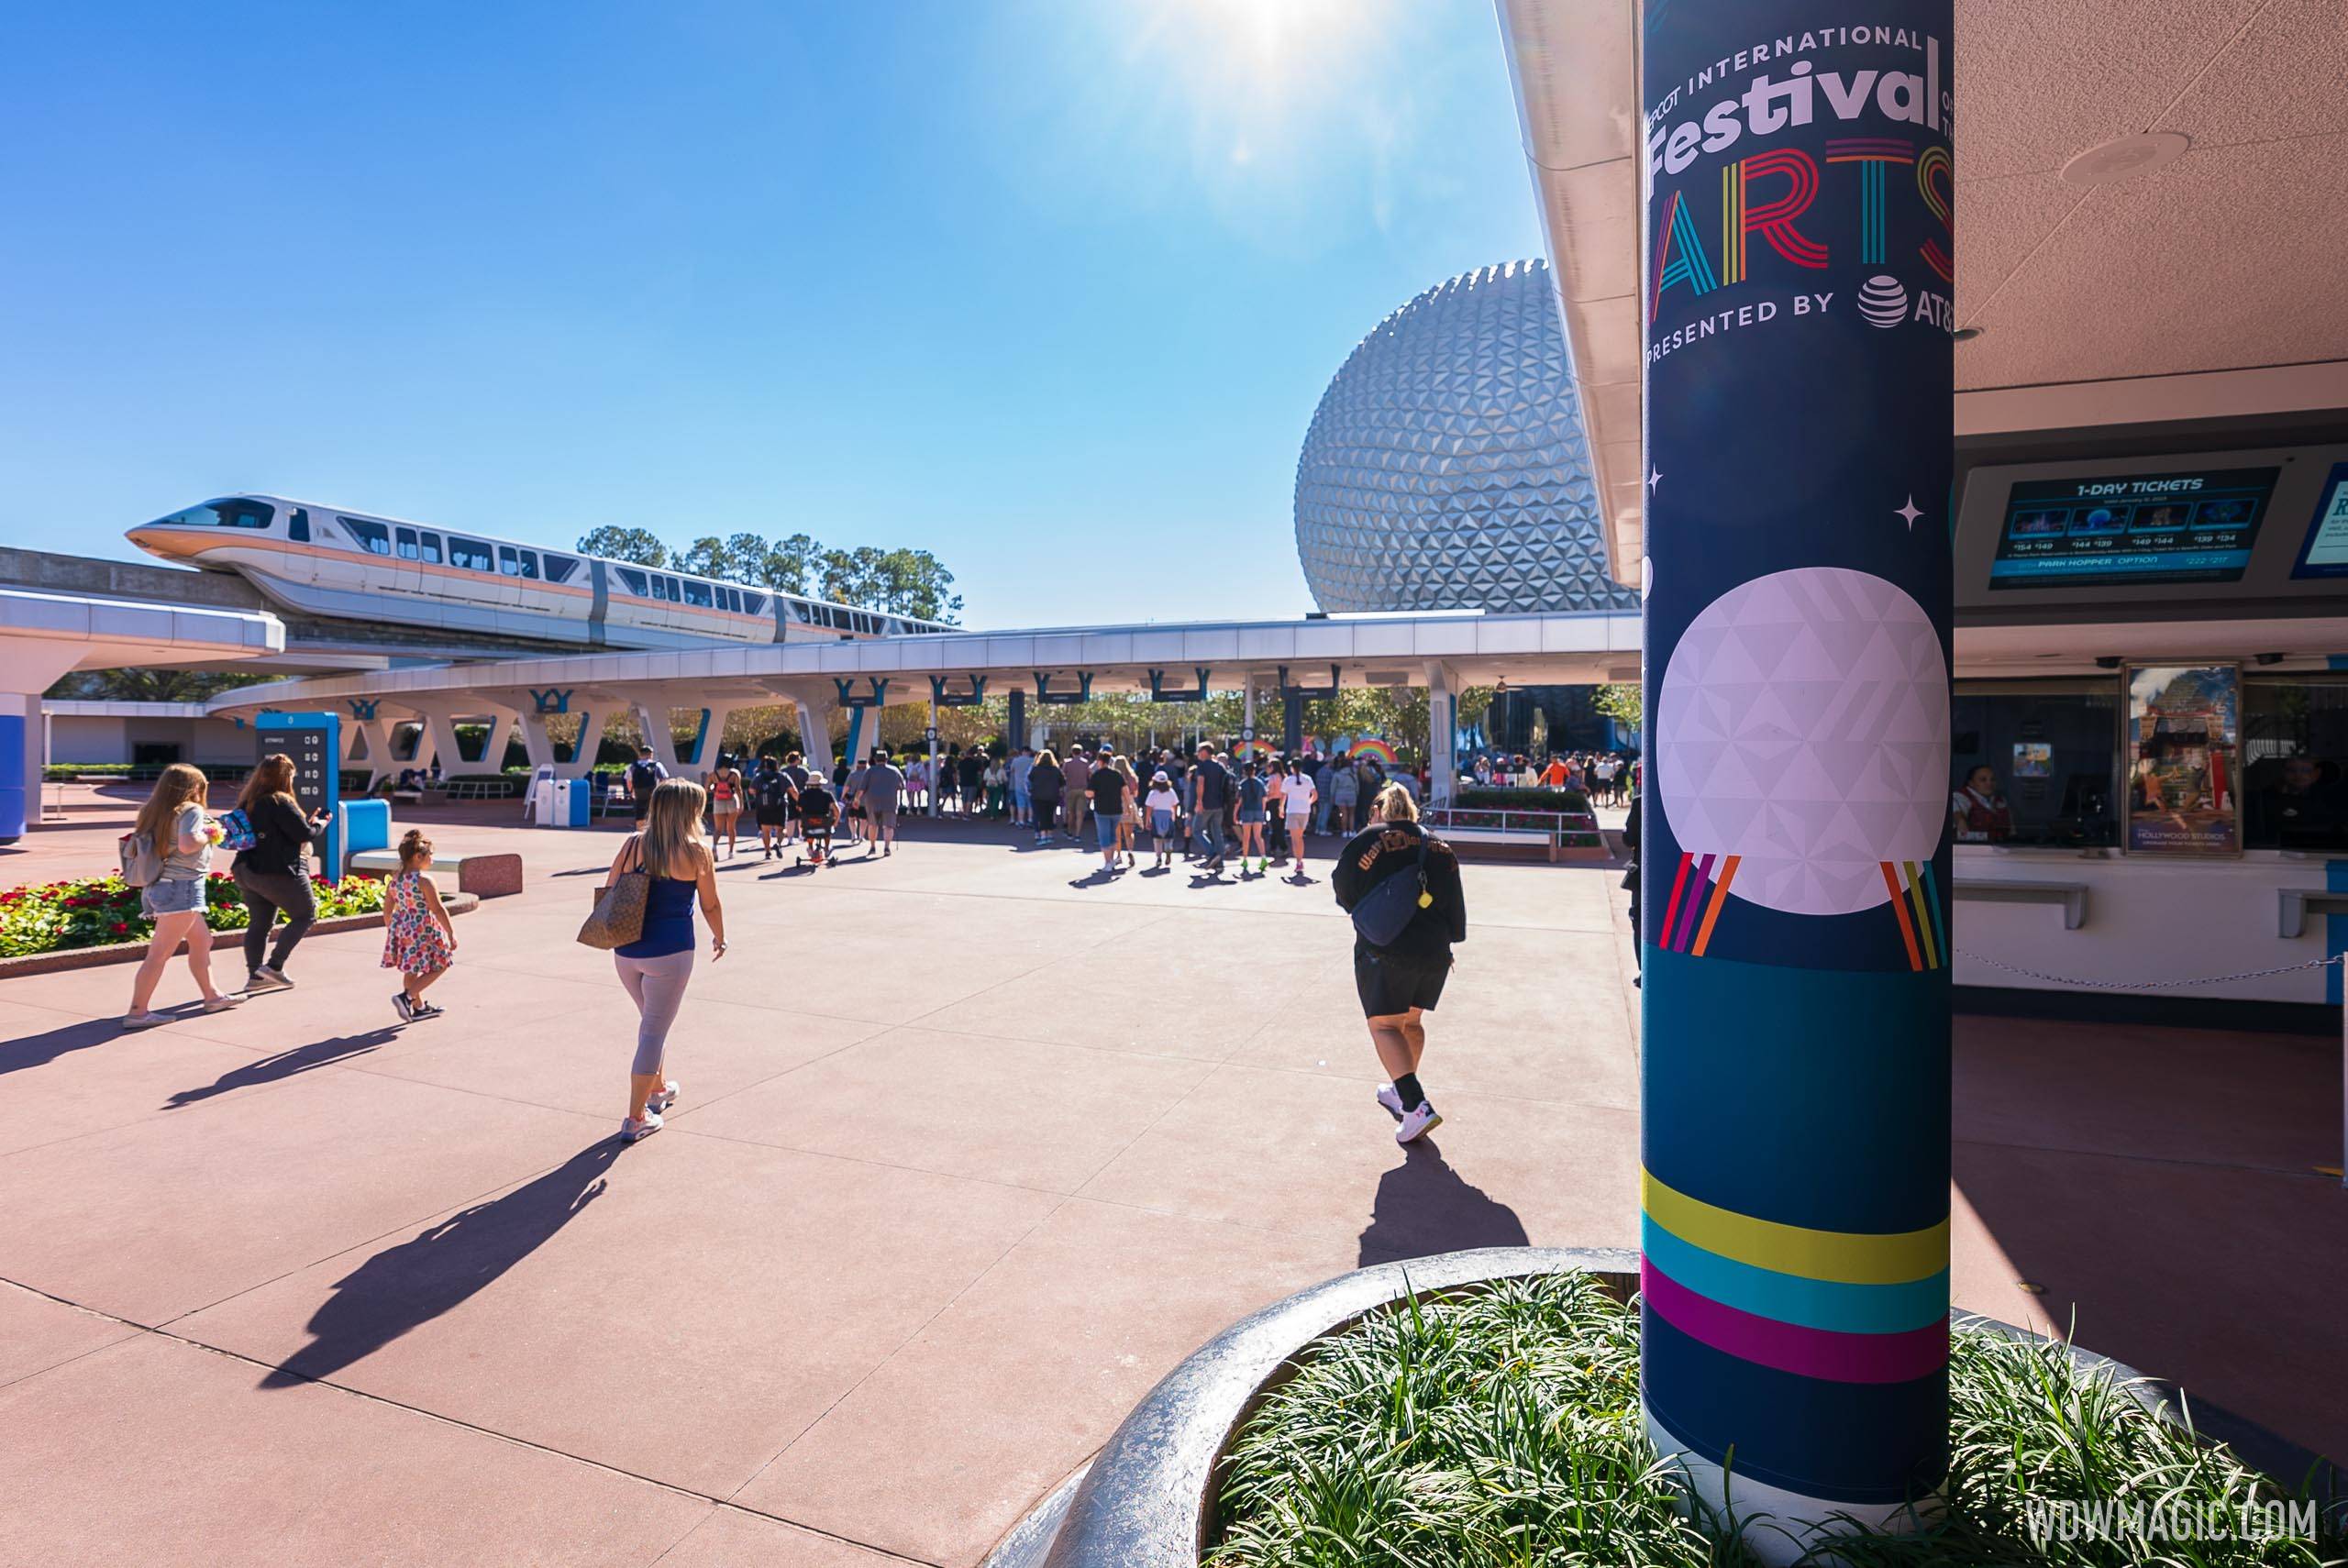 2023 EPCOT International Festival of the Arts ticket area banners